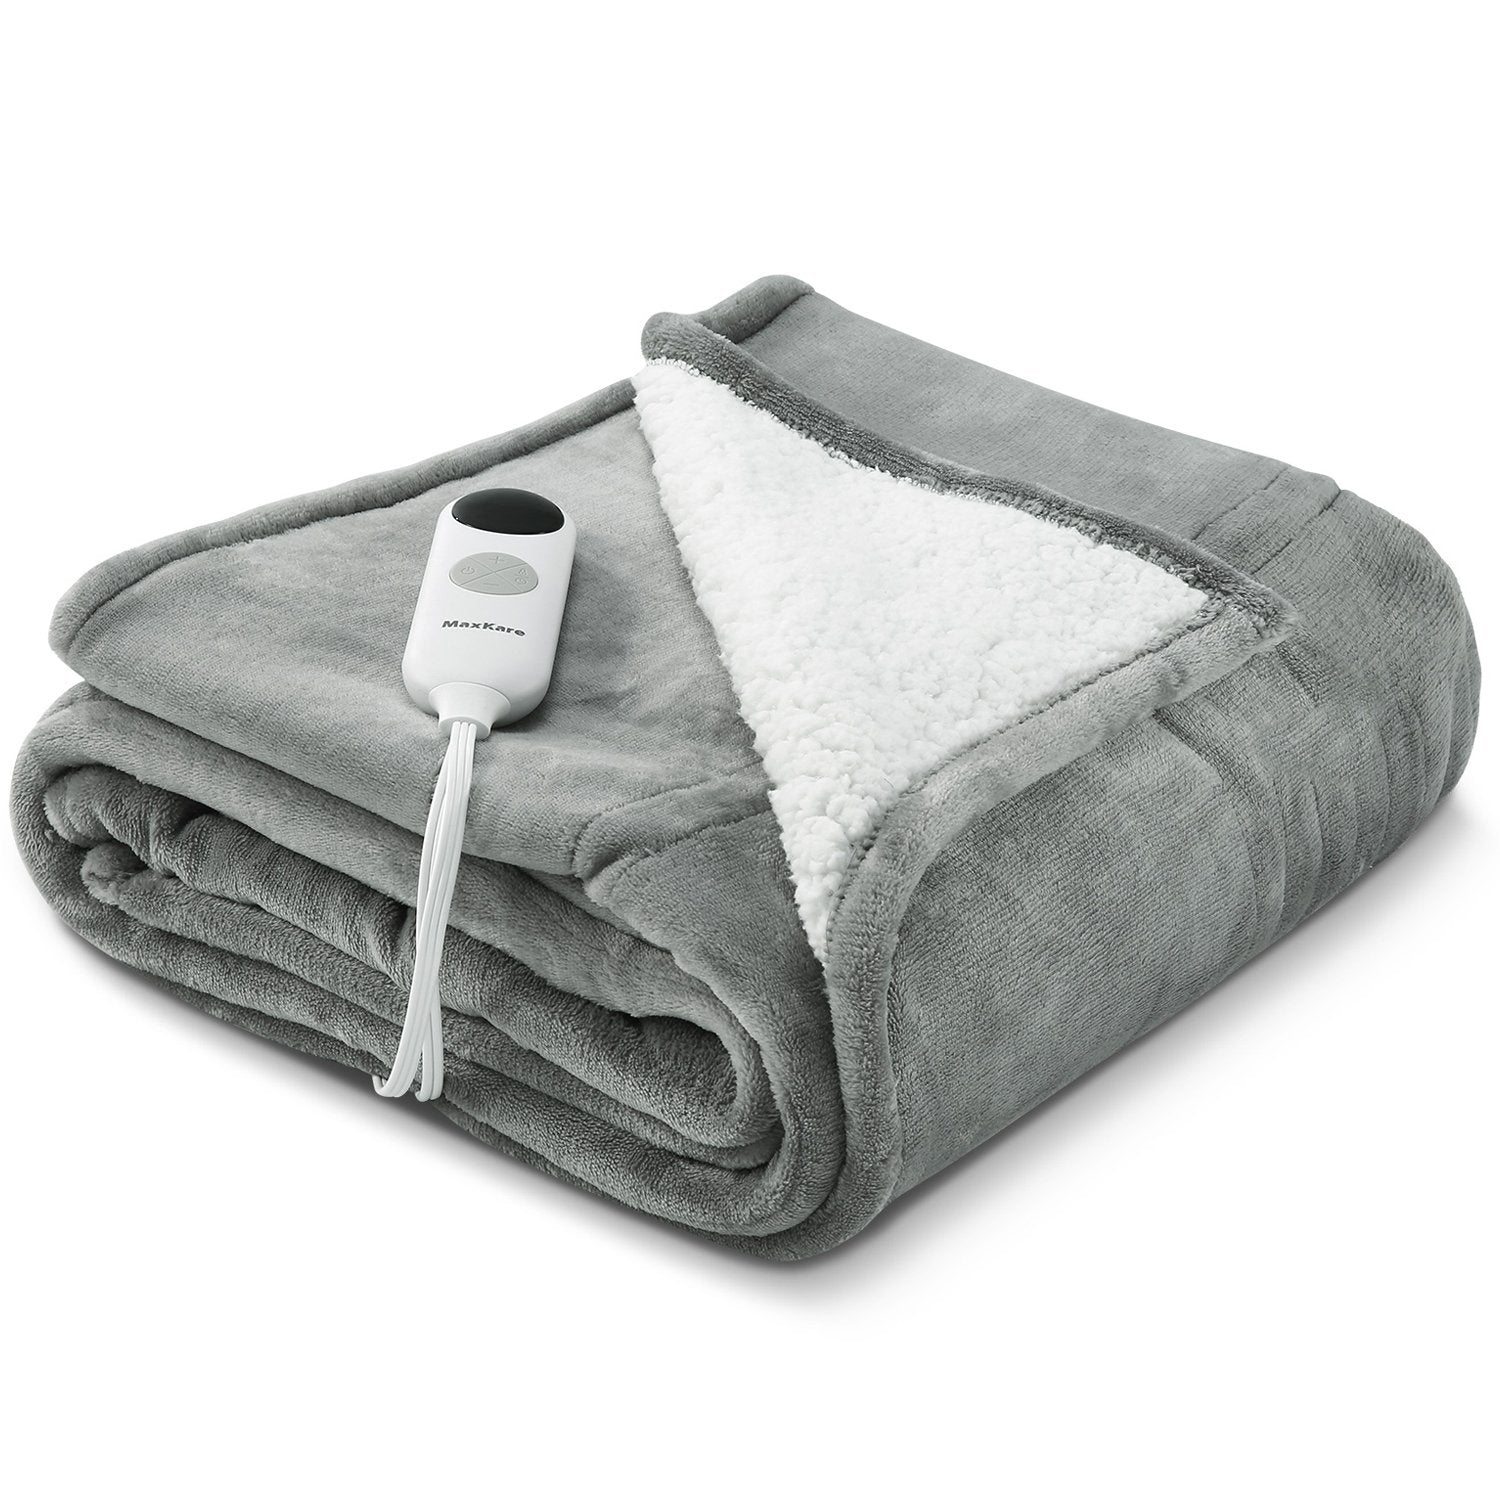 Electric Blanket Heated Throw Flannel & Sherpa Reversible Fast